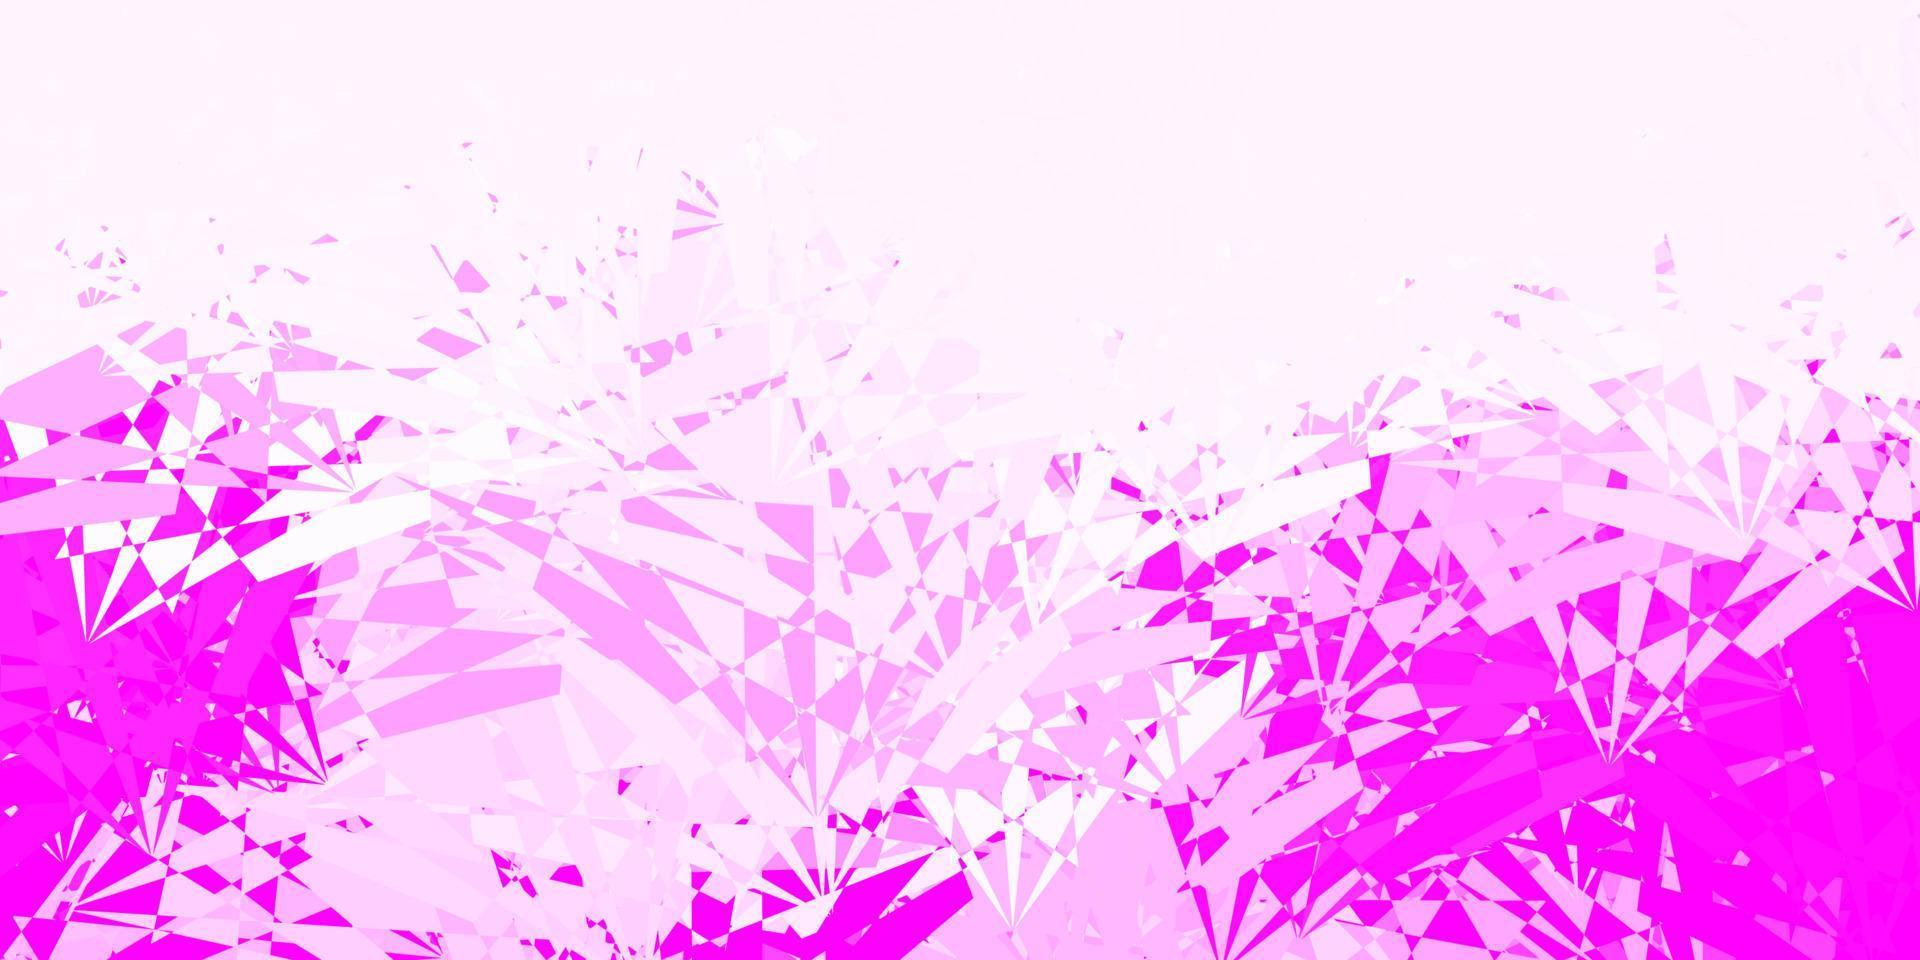 Light Pink vector template with triangle shapes.